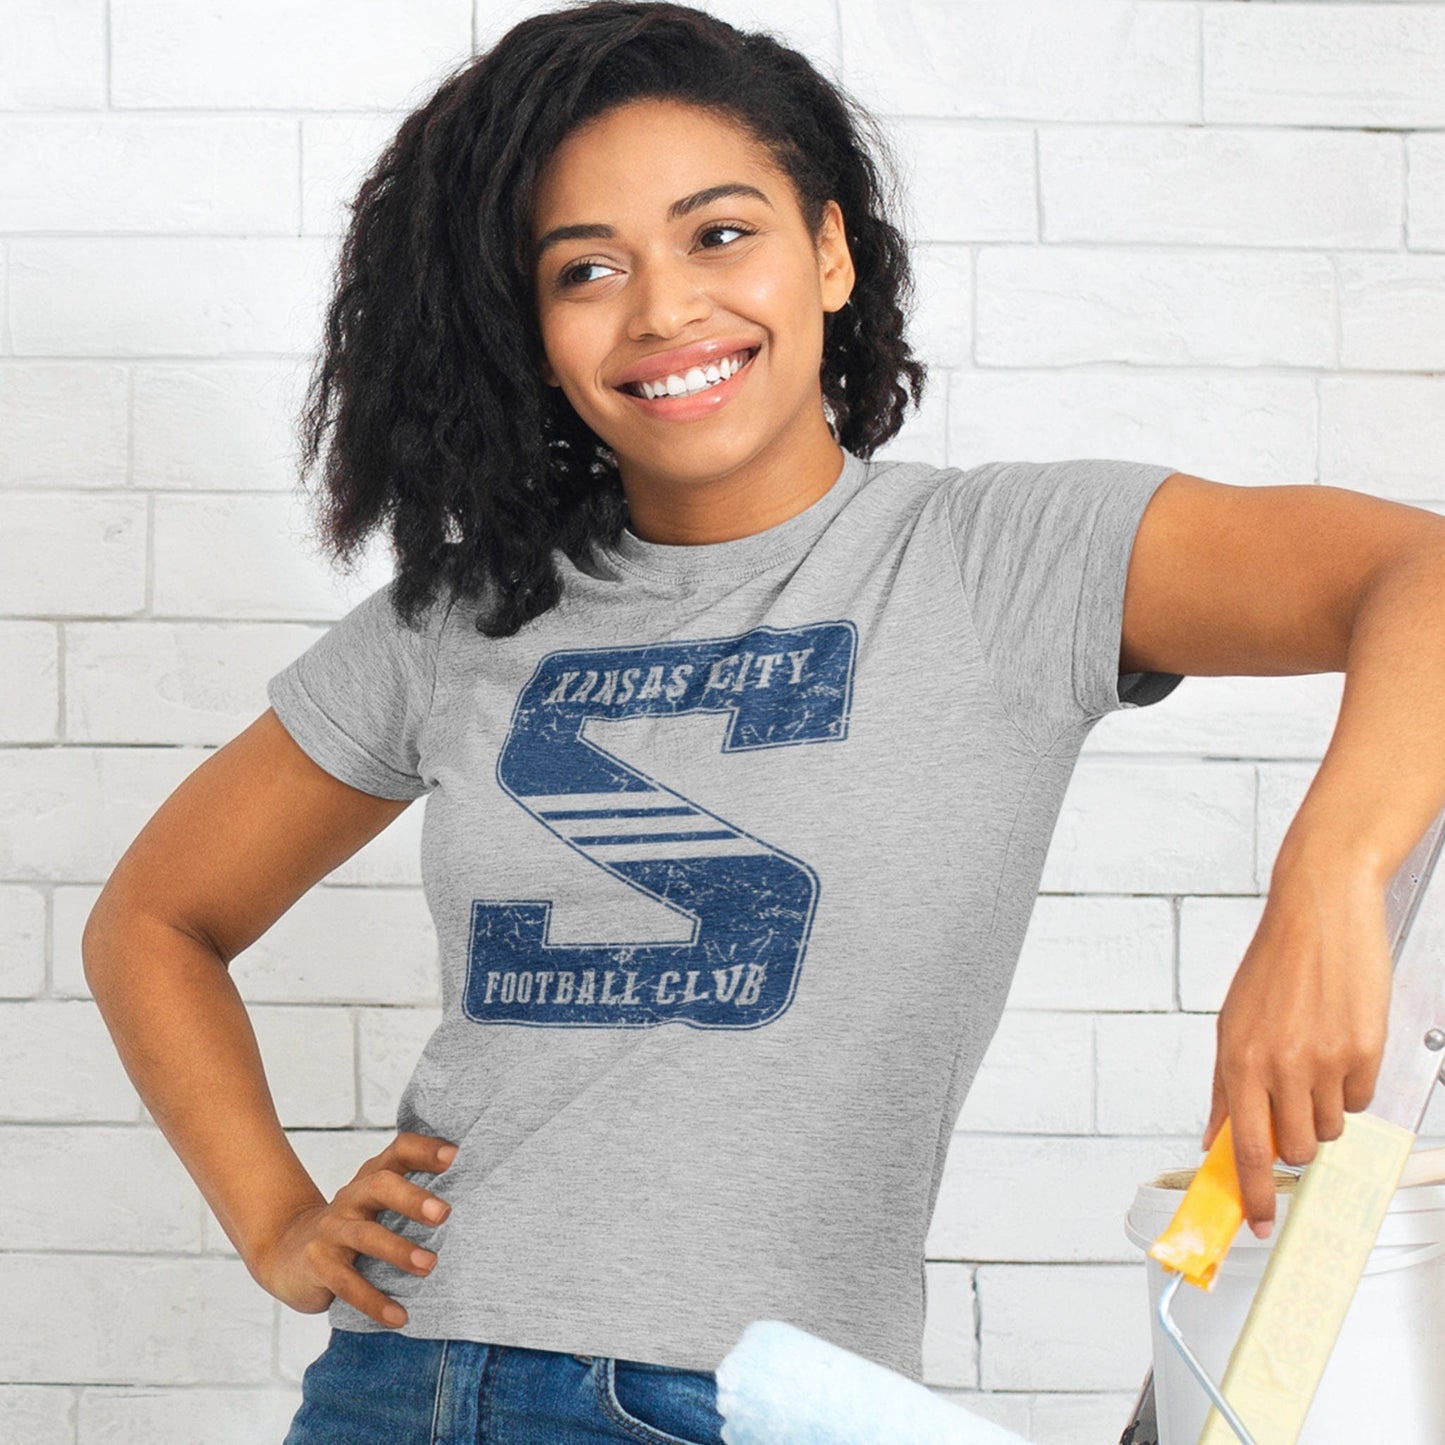 KC Swag Sporting Kansas City navy KANSAS CITY FOOTBALL CLUB on giant striped S on athletic heather grey t-shirt worn by female model painting a white brick wall